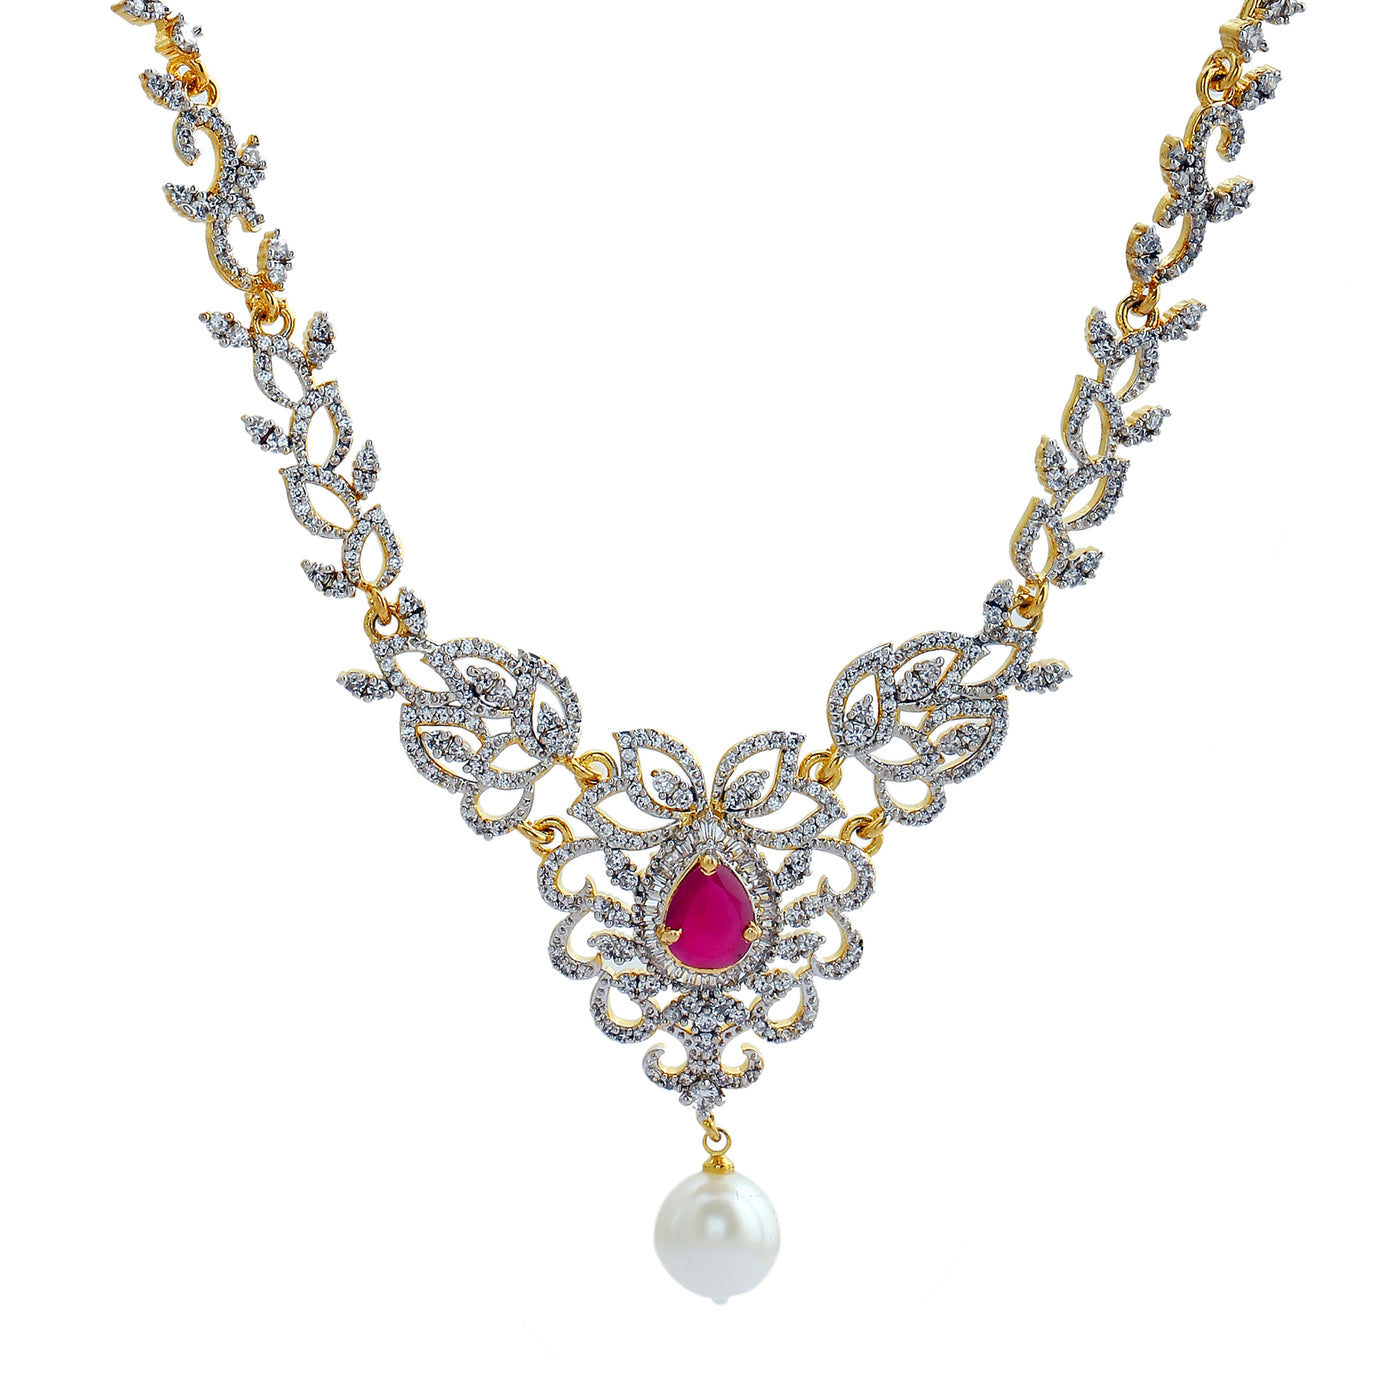 Traditional Gold and Silver plated Blooming Twine Necklace with American diamond, cz ruby and pearl